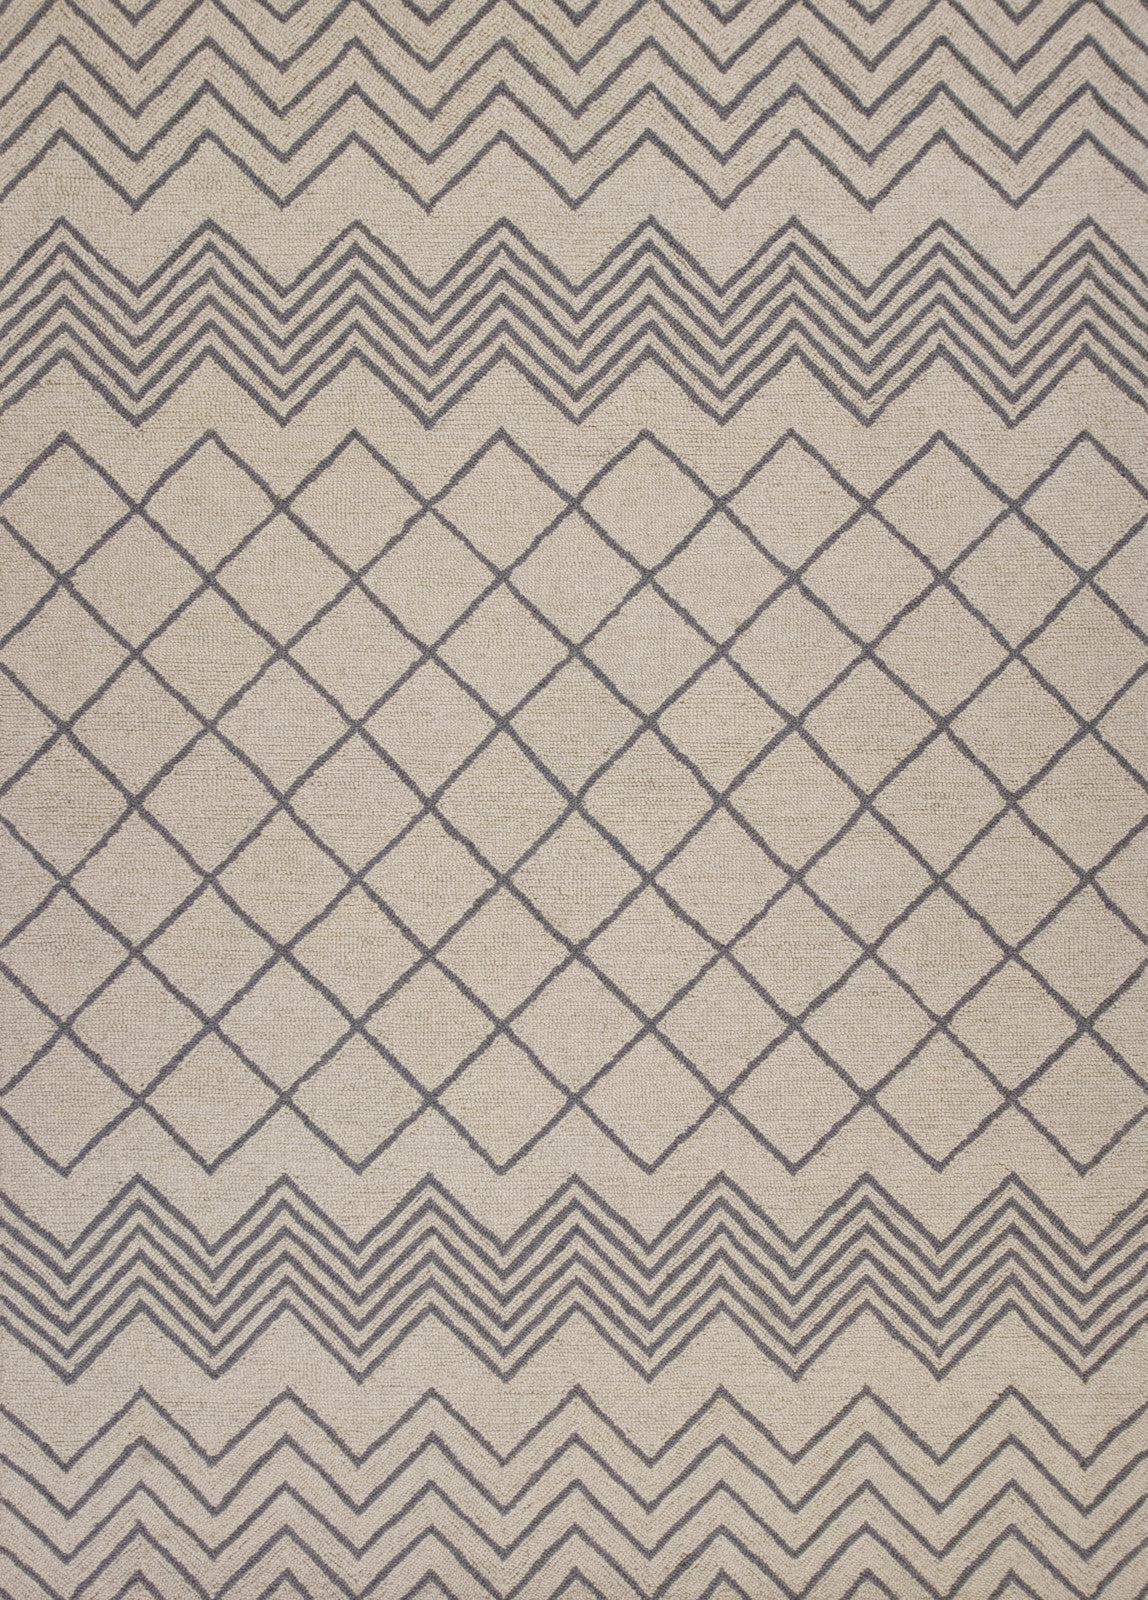 KAS Gramercy 1600 Ivory Elements Hand Tufted Area Rug